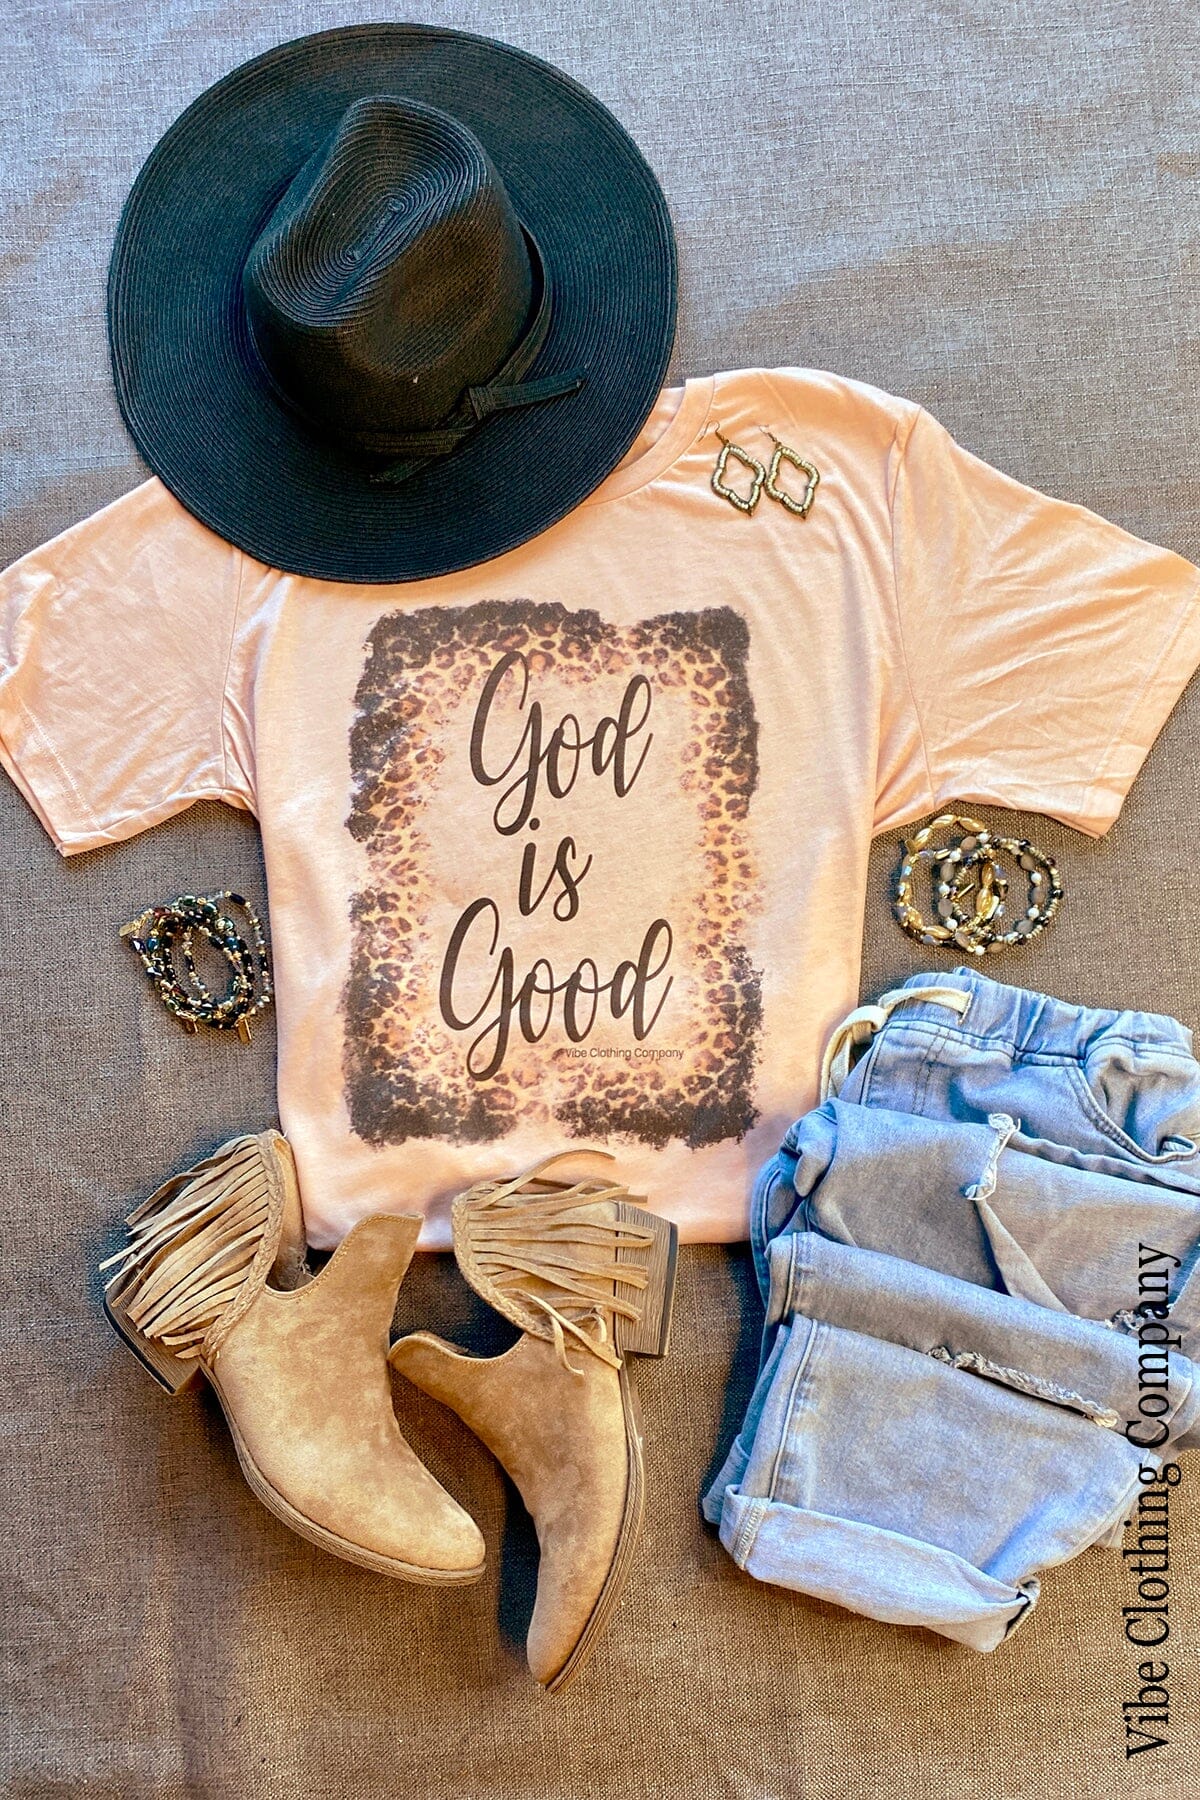 God is Good Graphic Tee graphic tees VCC 